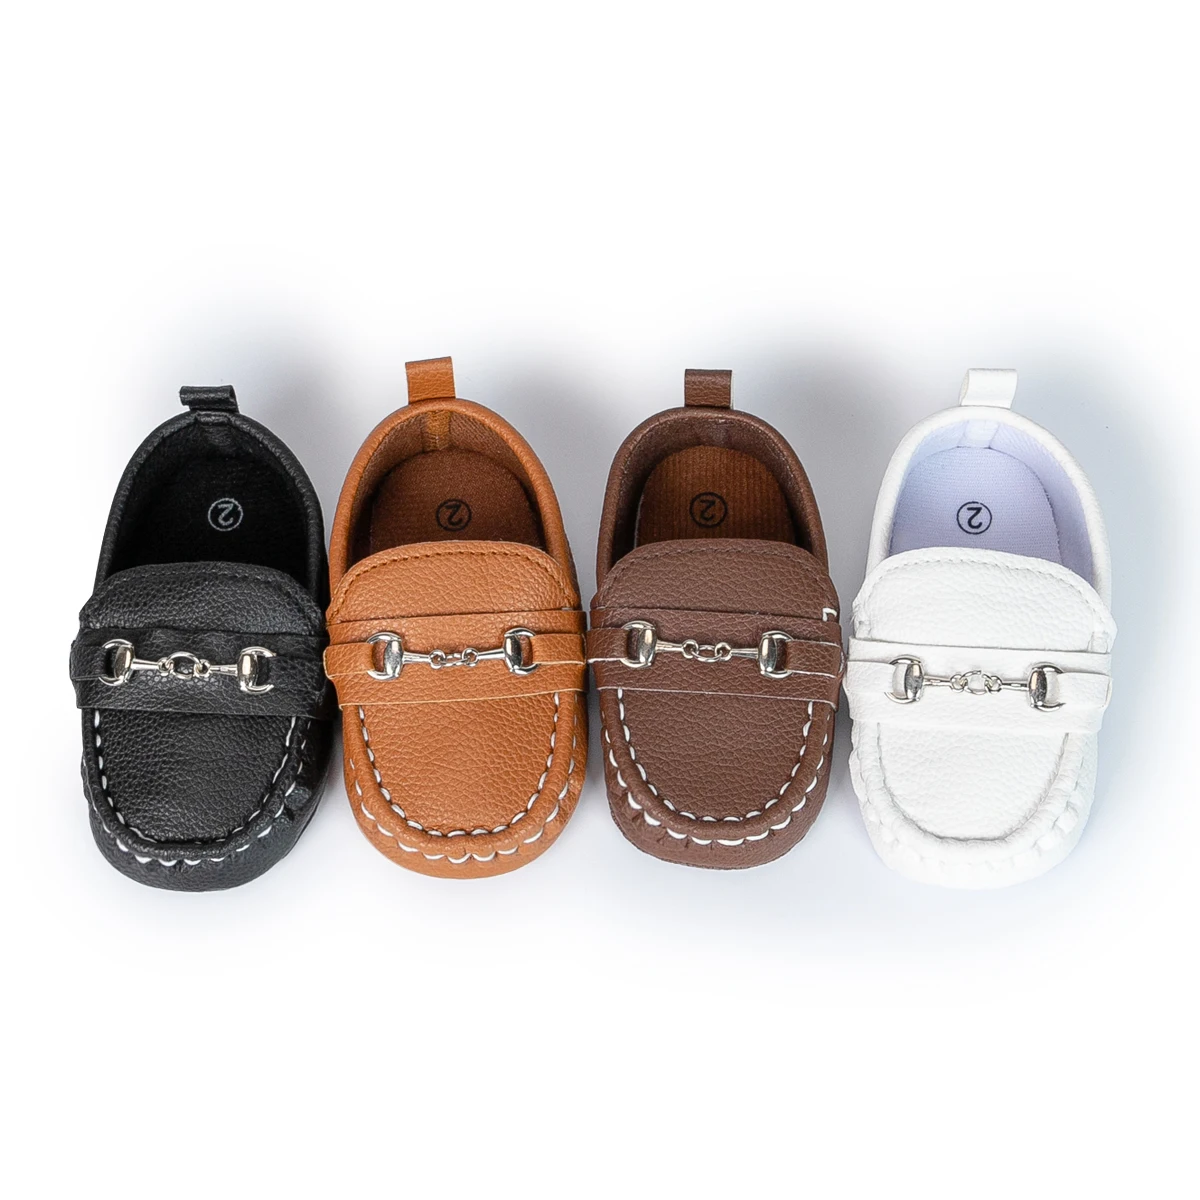 

New Arrival Fashion Casual Baby Boy Infant Moccasin Toddler Loafers Shoes, White,black